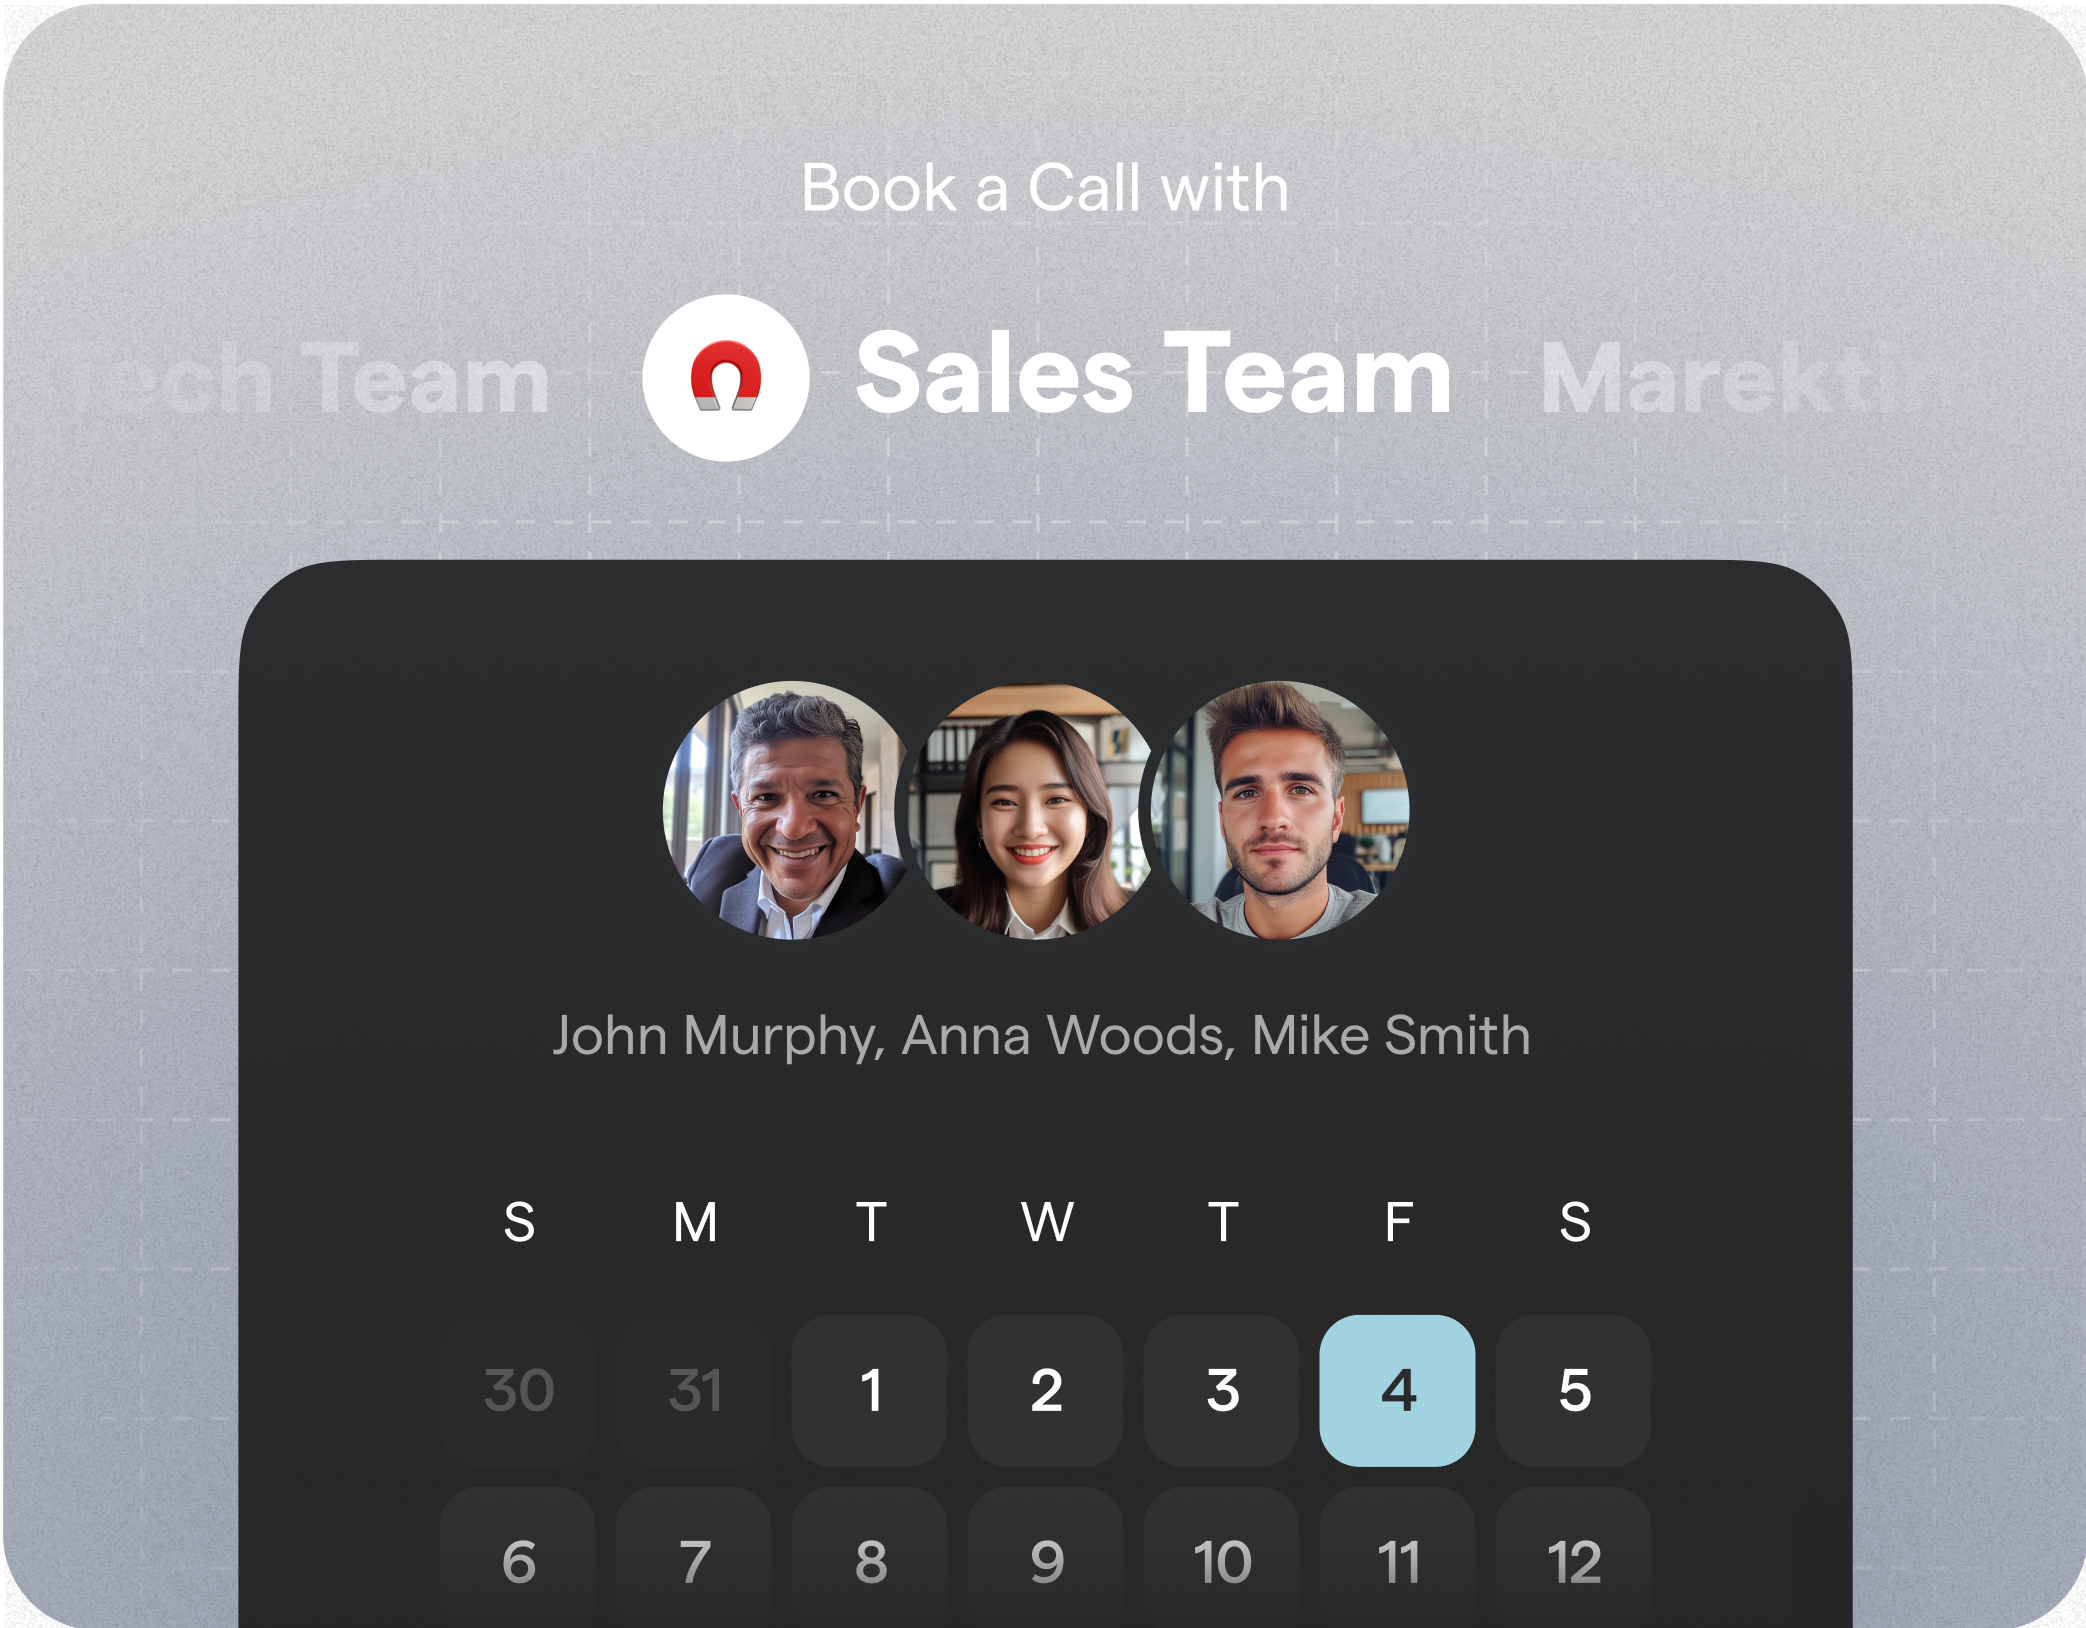 A bookable group calendar for a sales team consisting of John Murphy, Anna Woods, Mike Smith